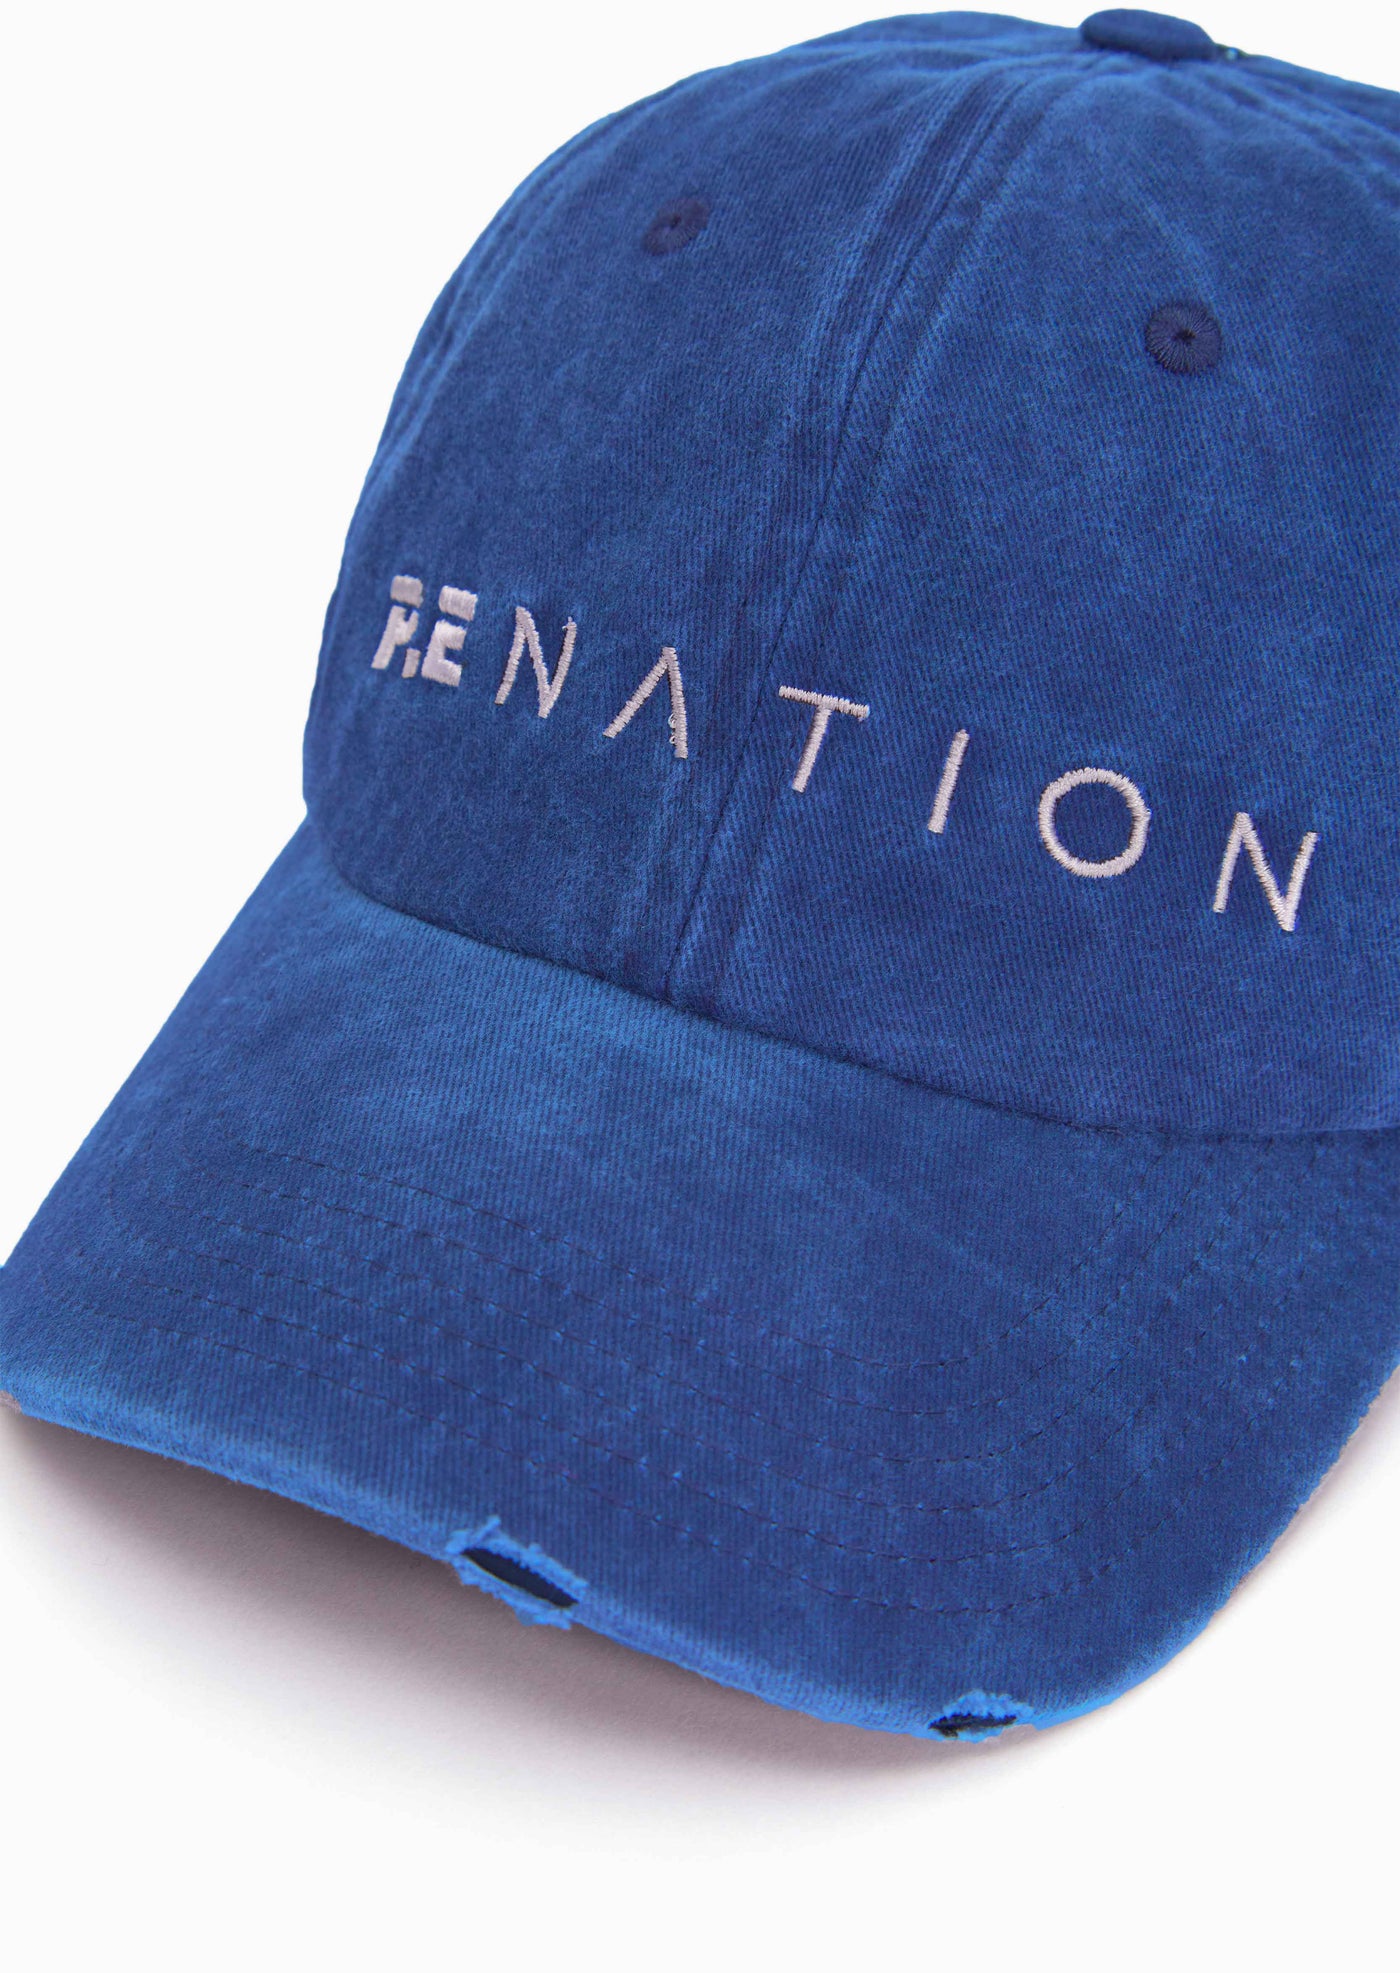 IMMERSION CAP IN BLUE